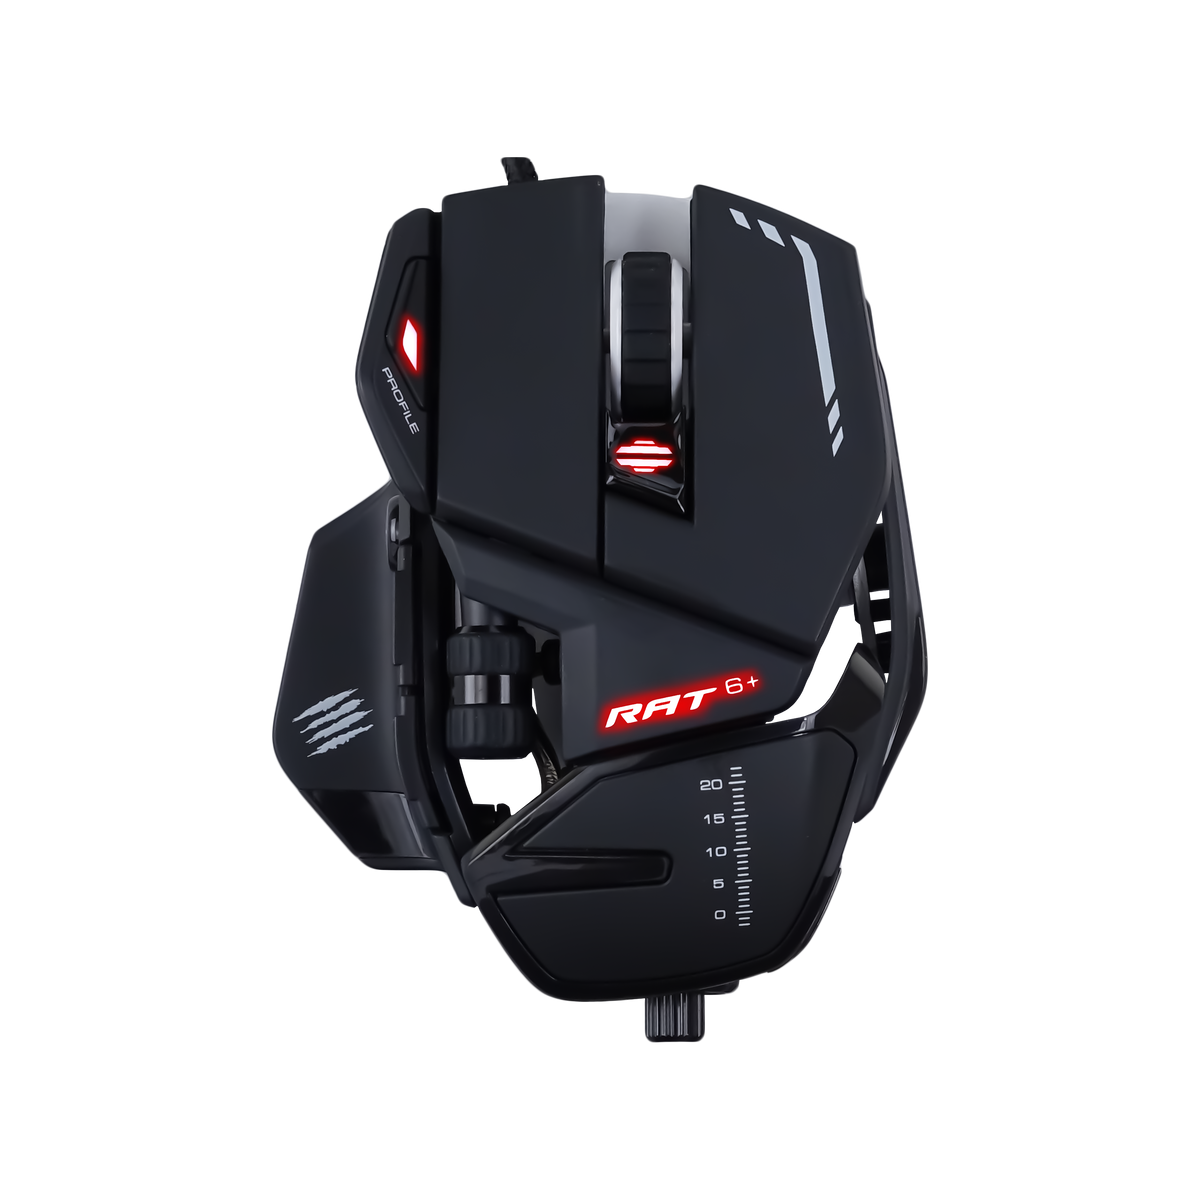 MADCATZ R.A.T 6 Plus - Optical Gaming Mouse - Black